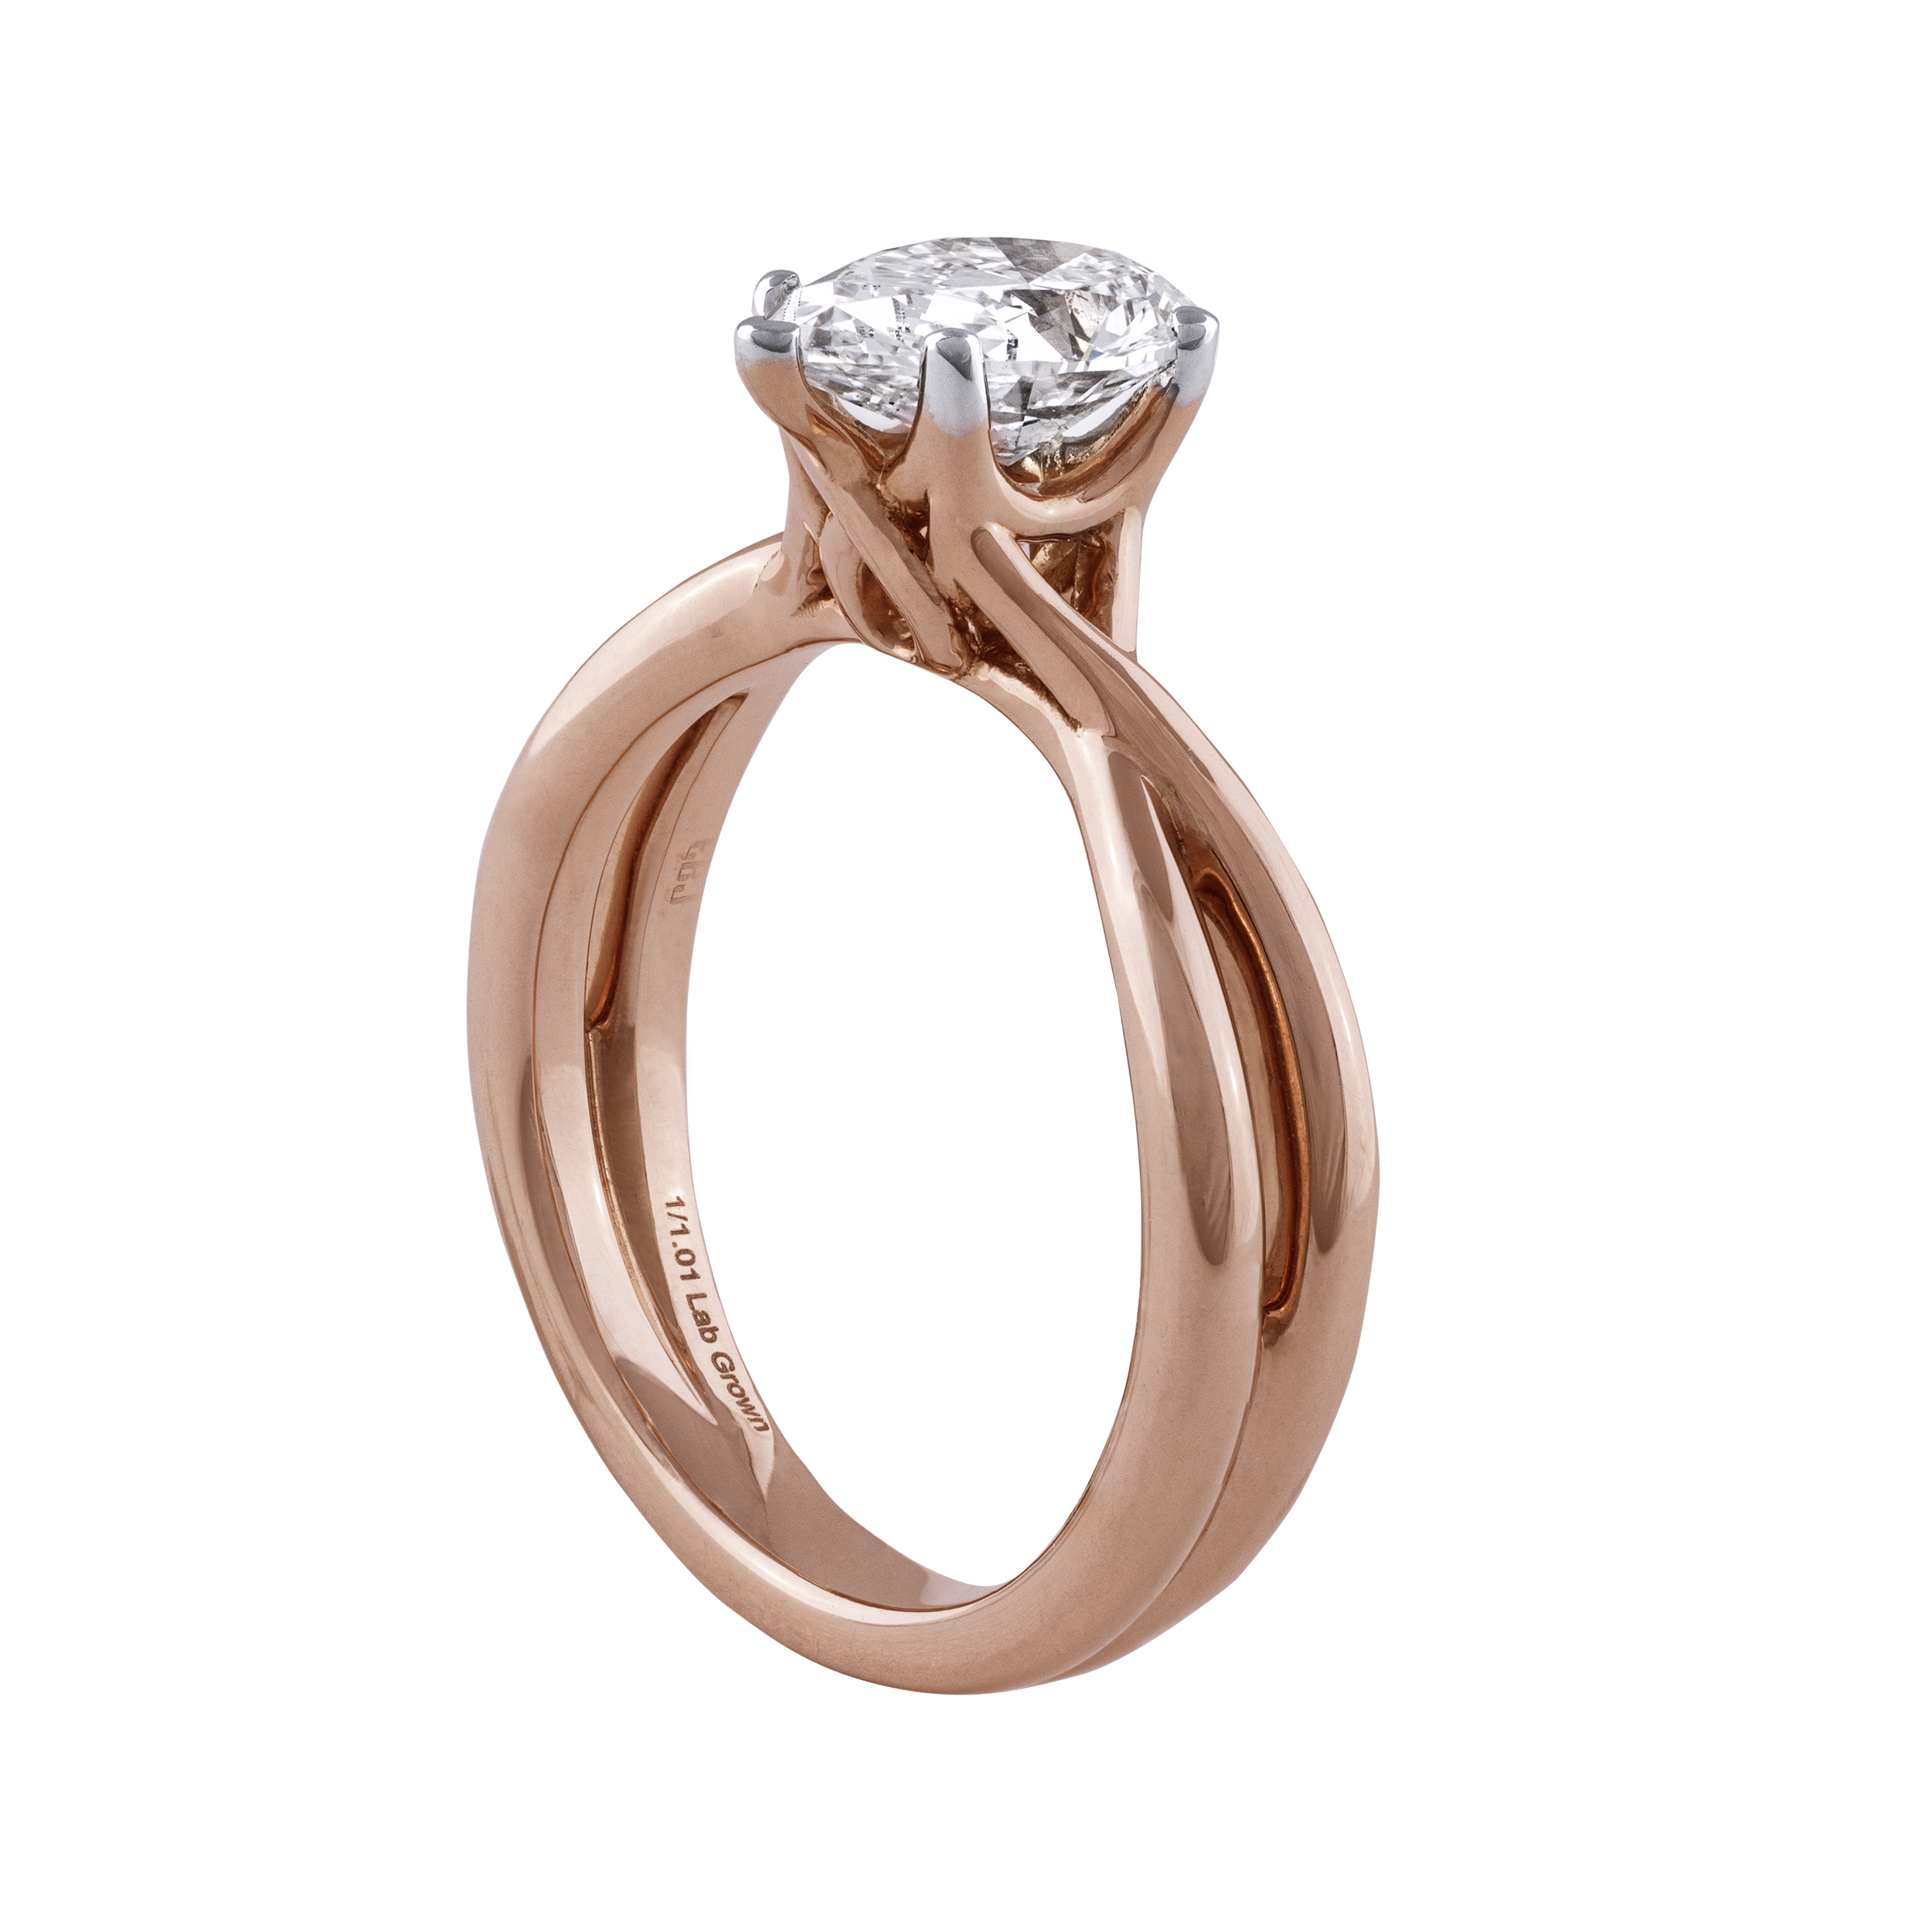 Rose Gold Solitaire Diamond Ring | SKU: 0019053028